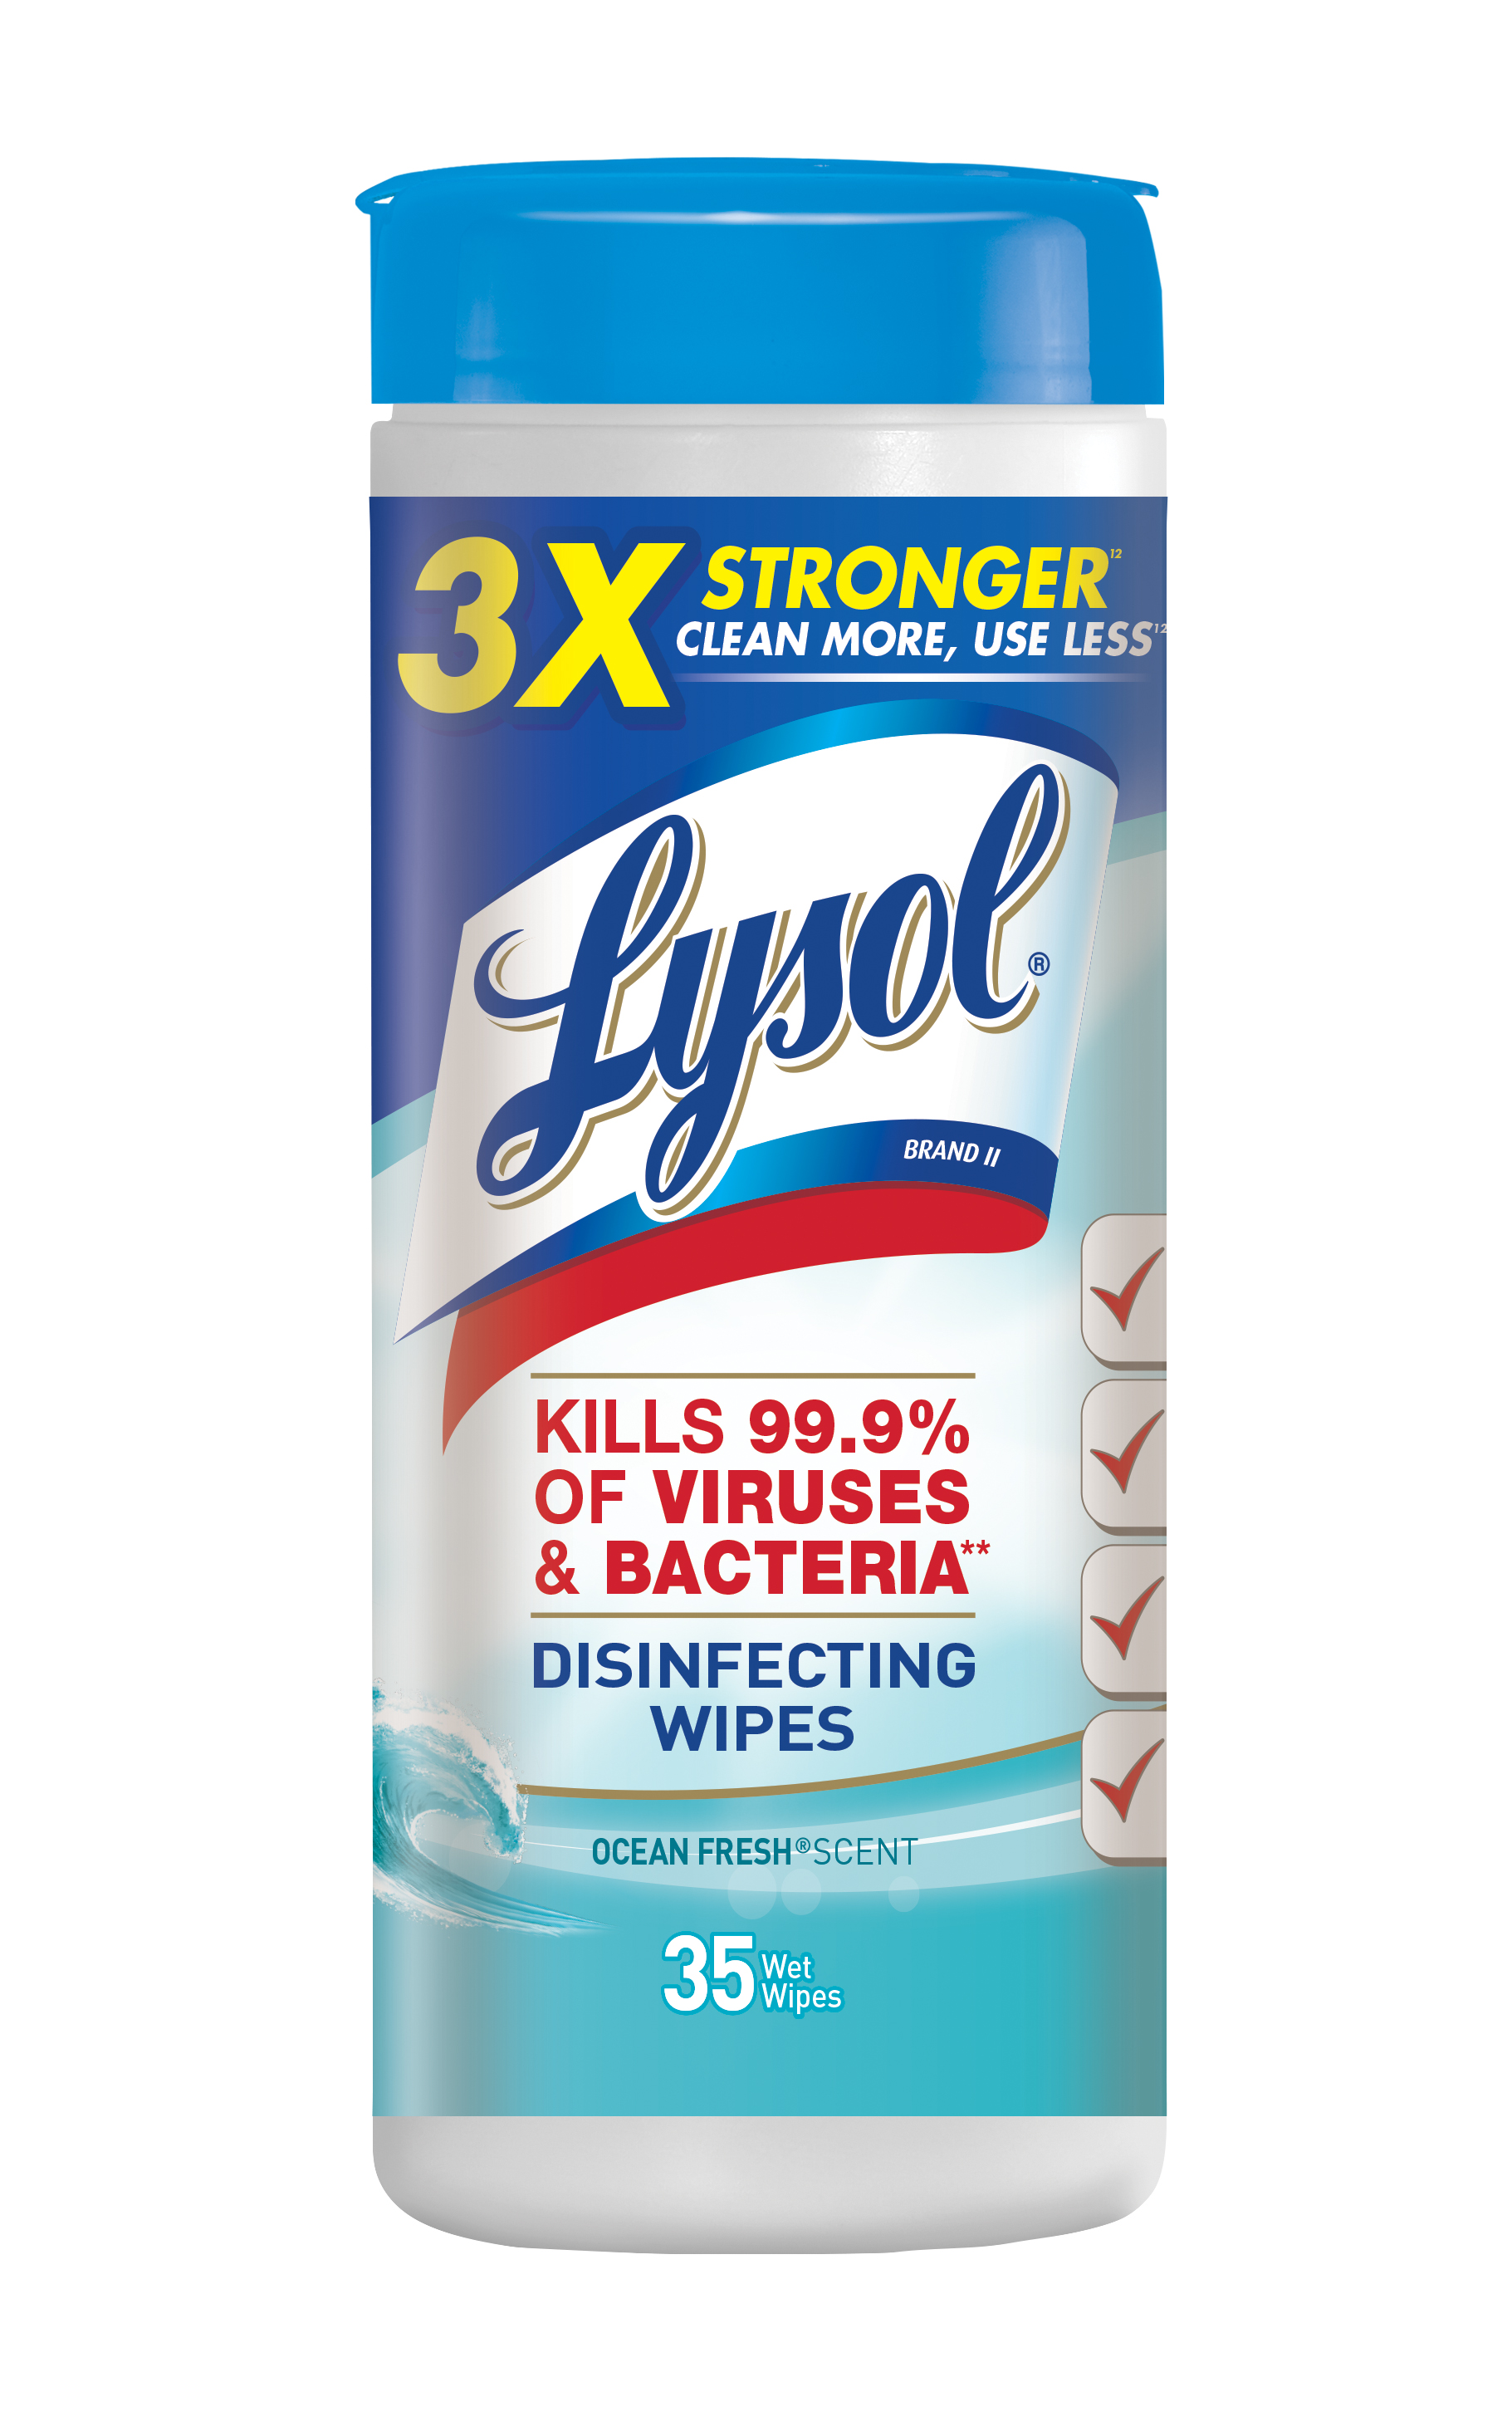 Lysol Disinfecting Wipes, Ocean Fresh, 35ct, Tested & Proven to Kill COVID-19 Virus, Packaging May Vary - image 1 of 6